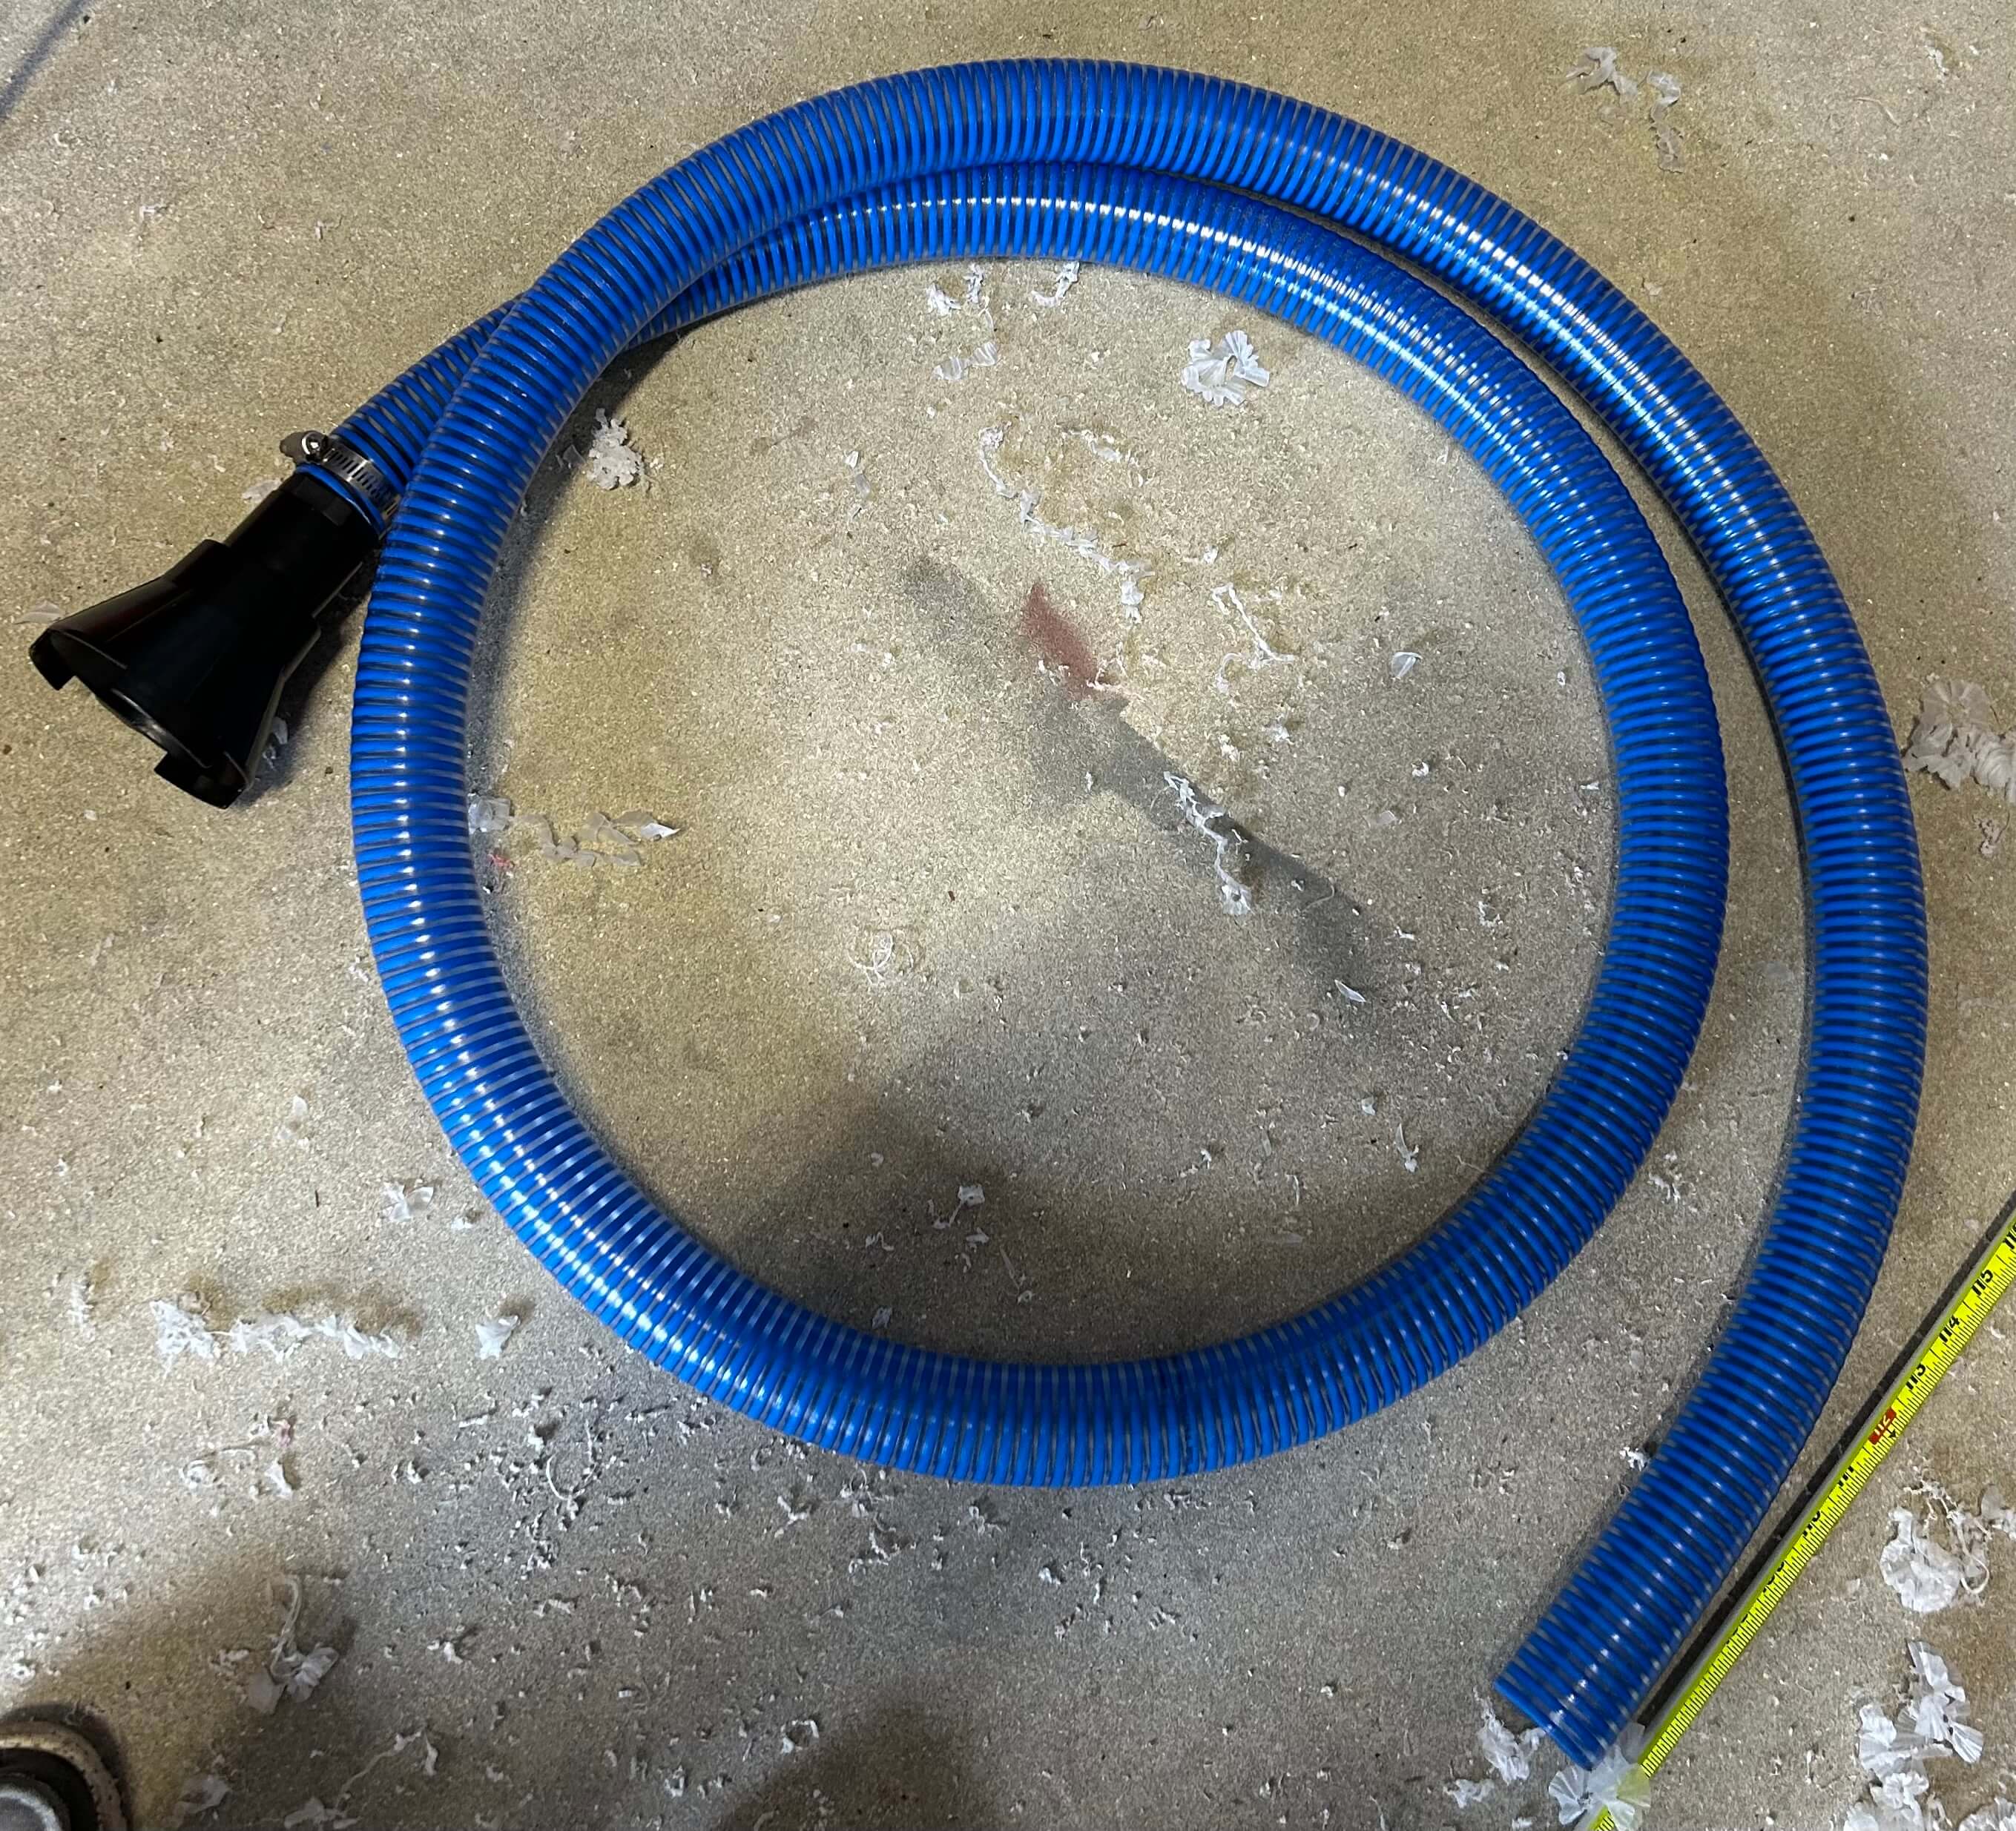 Sludge sucker with 1 1/2" hose in multiple lengths for quick driveway draining. Best soft wash and soft wash supply.